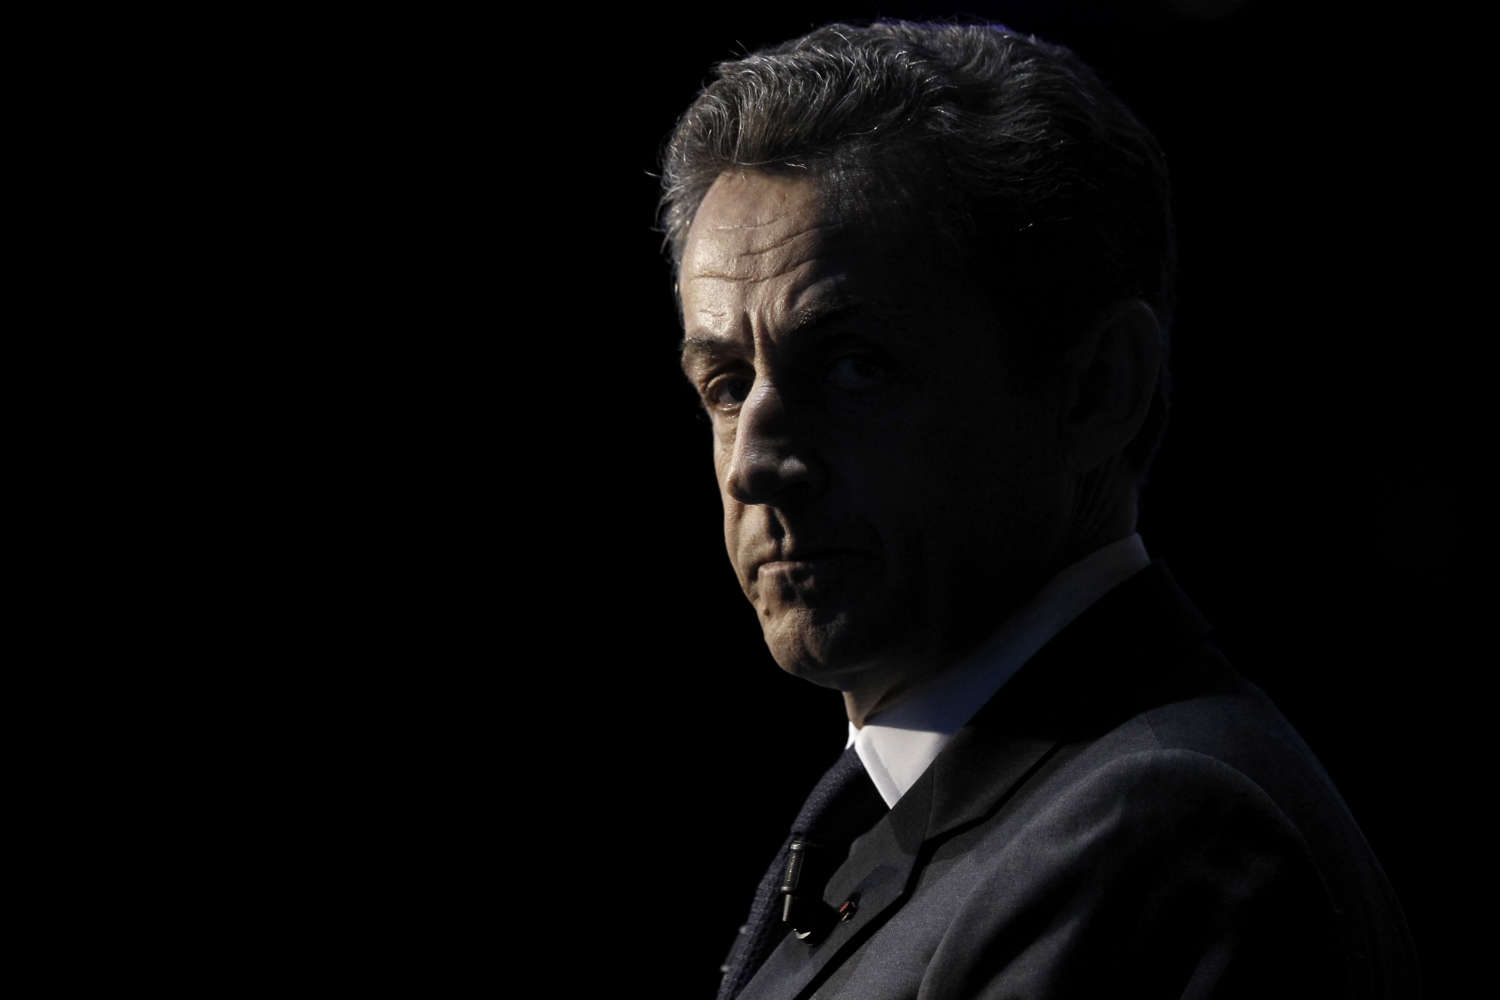 Sarkozy's legal cloud puts his political future in doubt (Kenzo Tribouillard—AFP/Getty Images)